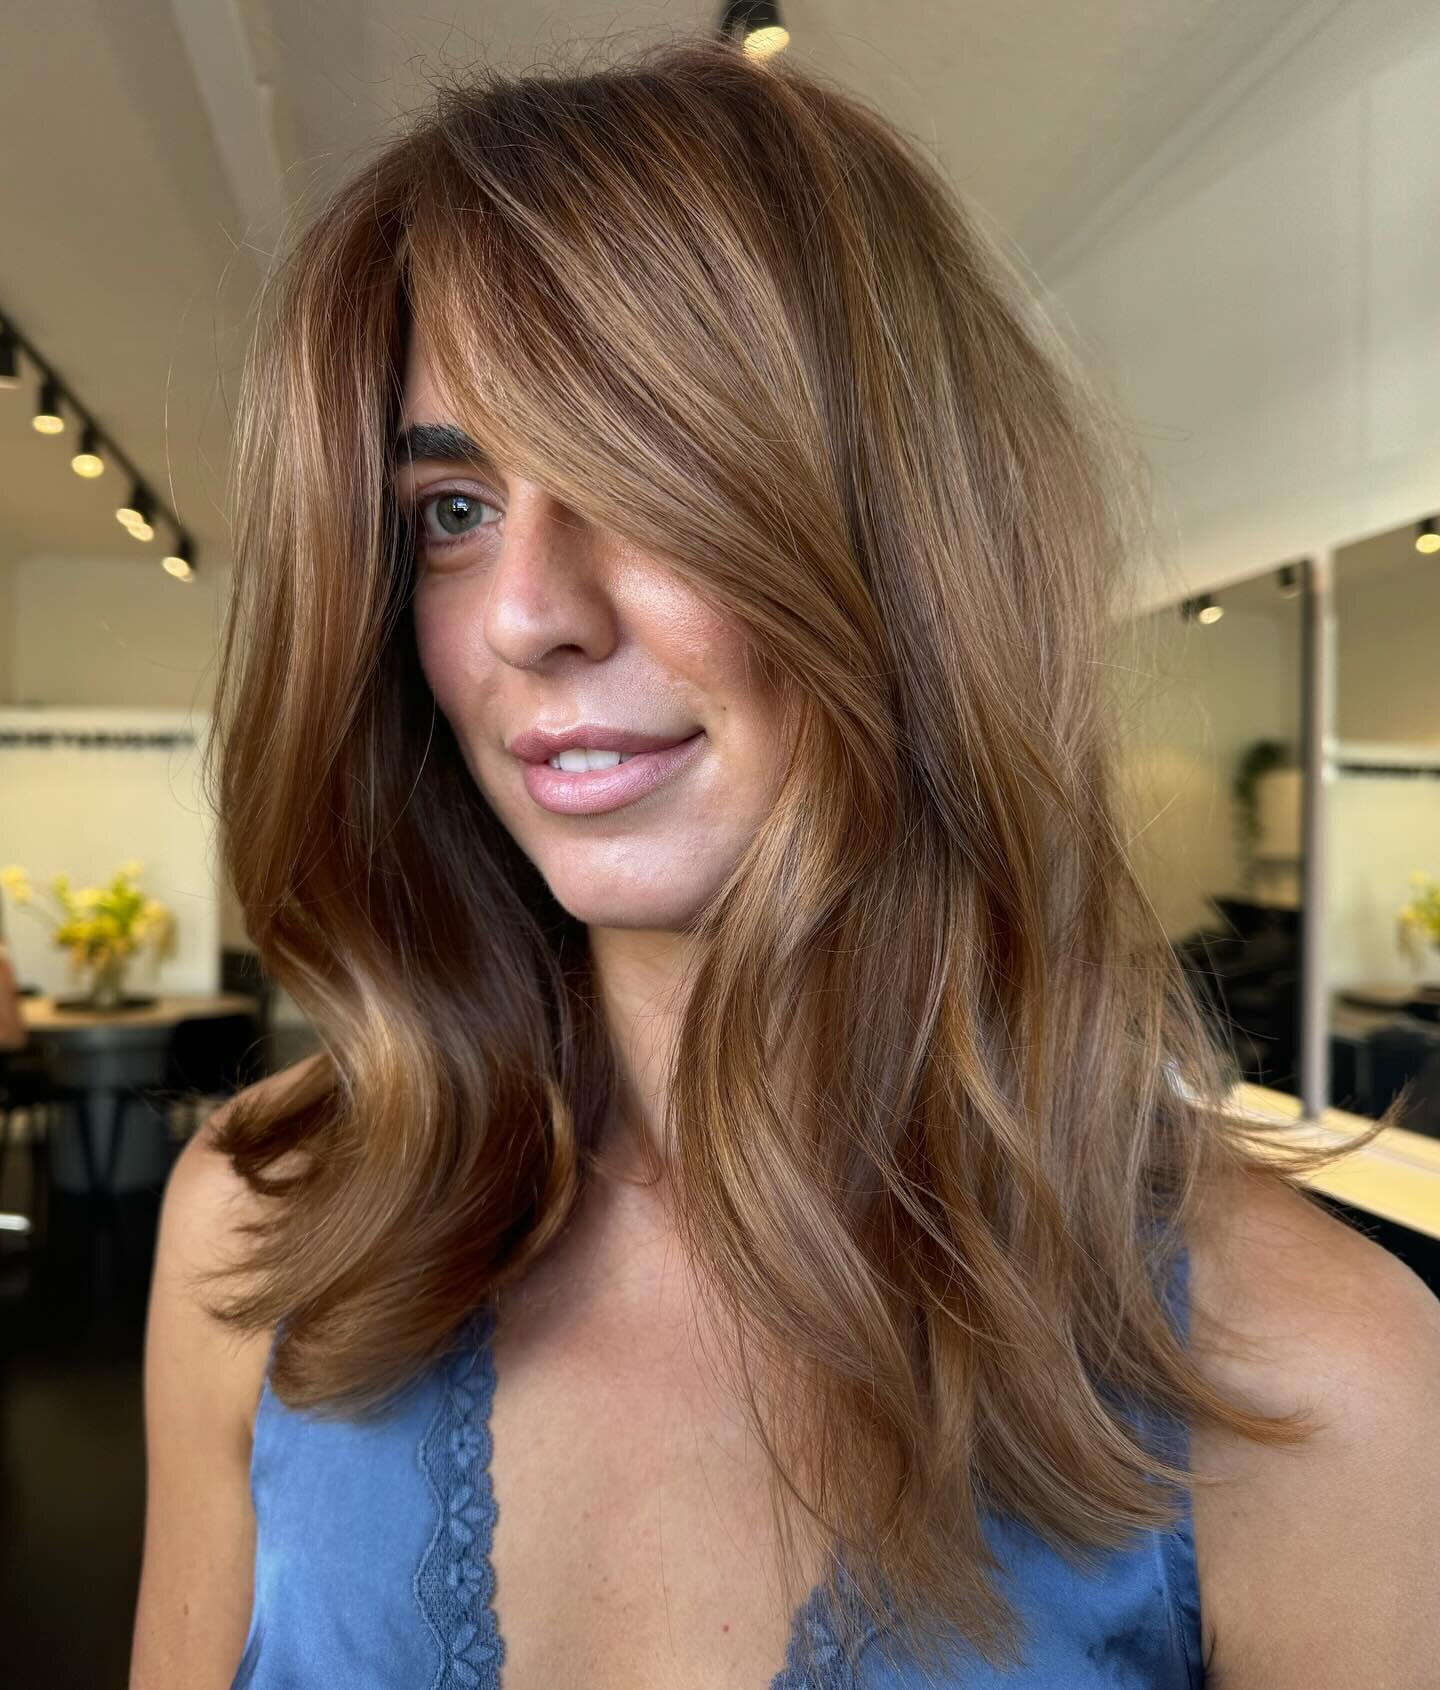 Still obsessed with how Jacob took @hannahklly1 from blonde to copper. 🍓

Jacob sent Hannah home with @christopherobinparis Shade Variation Mask in Copper Chic to help maintain this beautiful tone. 

Styled using @originalmineral and @ibizahairtools